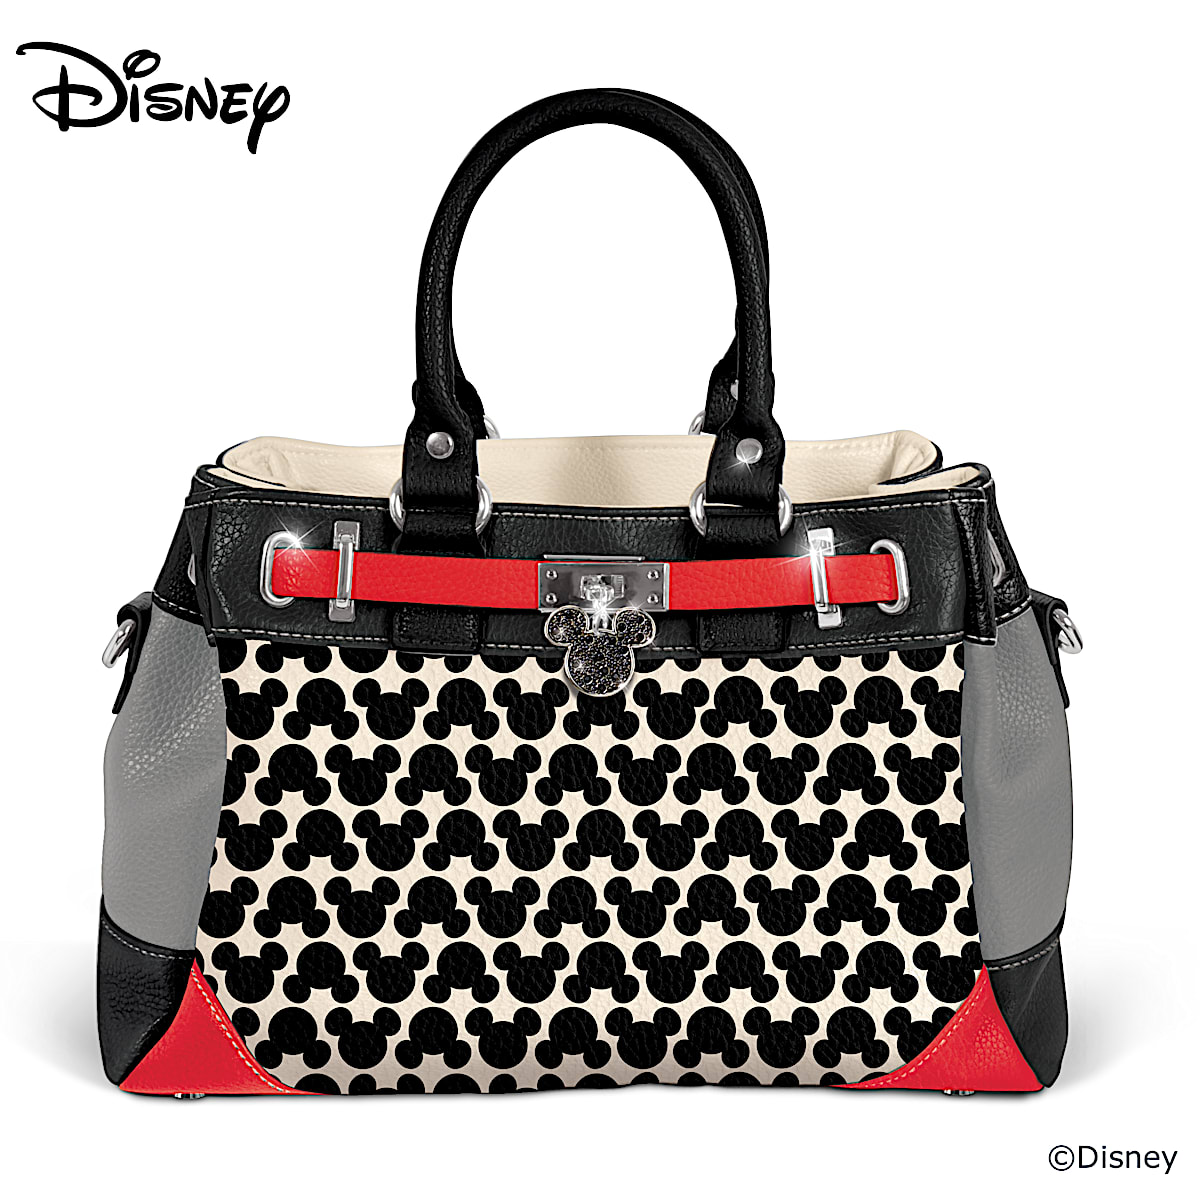 Disney Dooney & Bourke Bag - Mickey Mouse and Friends Germany - Tote Bag